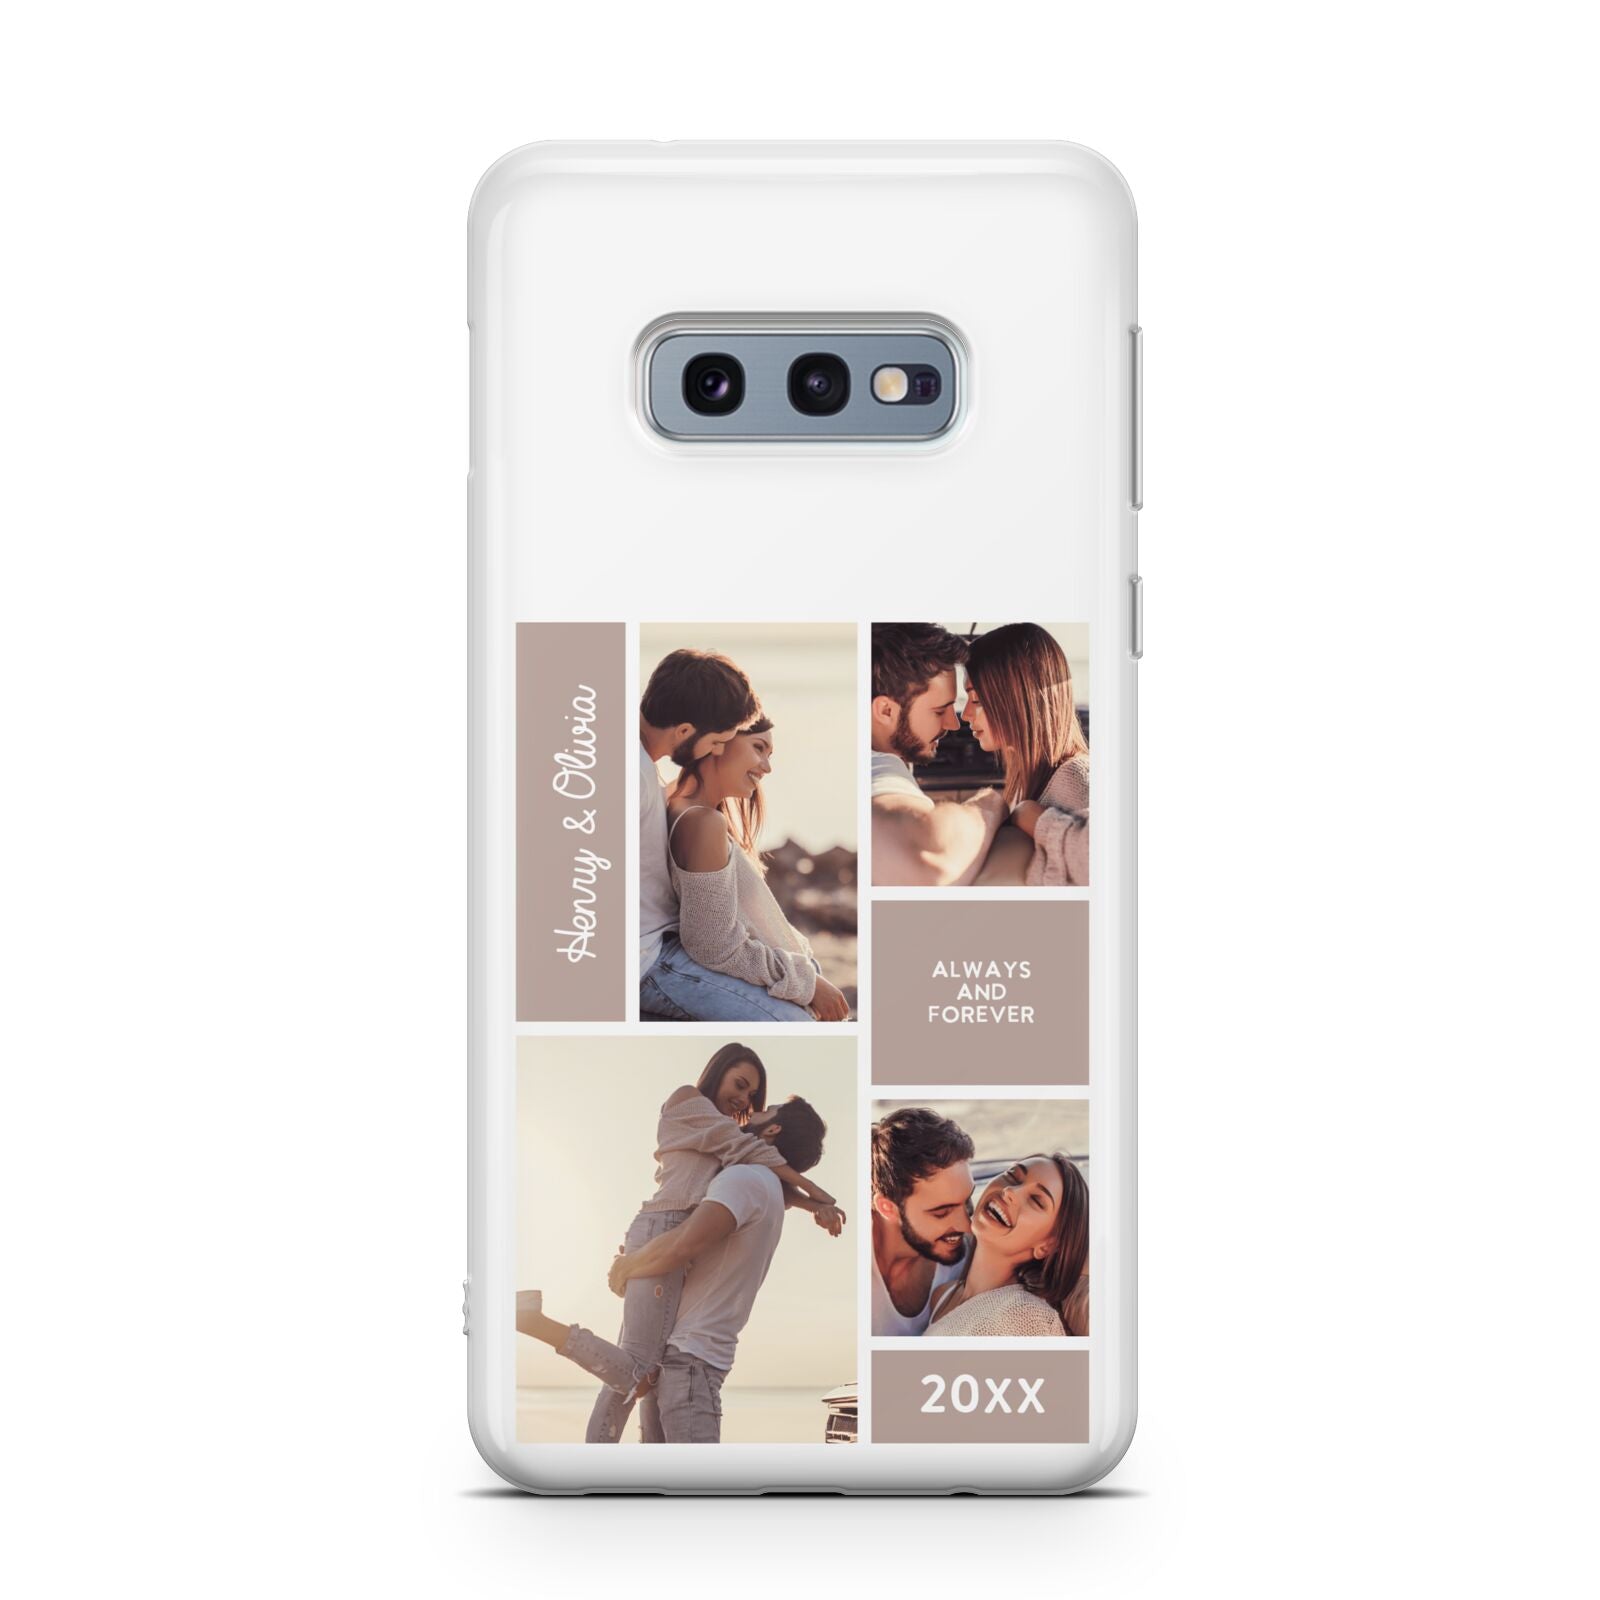 Couples Valentine Photo Collage Personalised Samsung Galaxy S10E Case